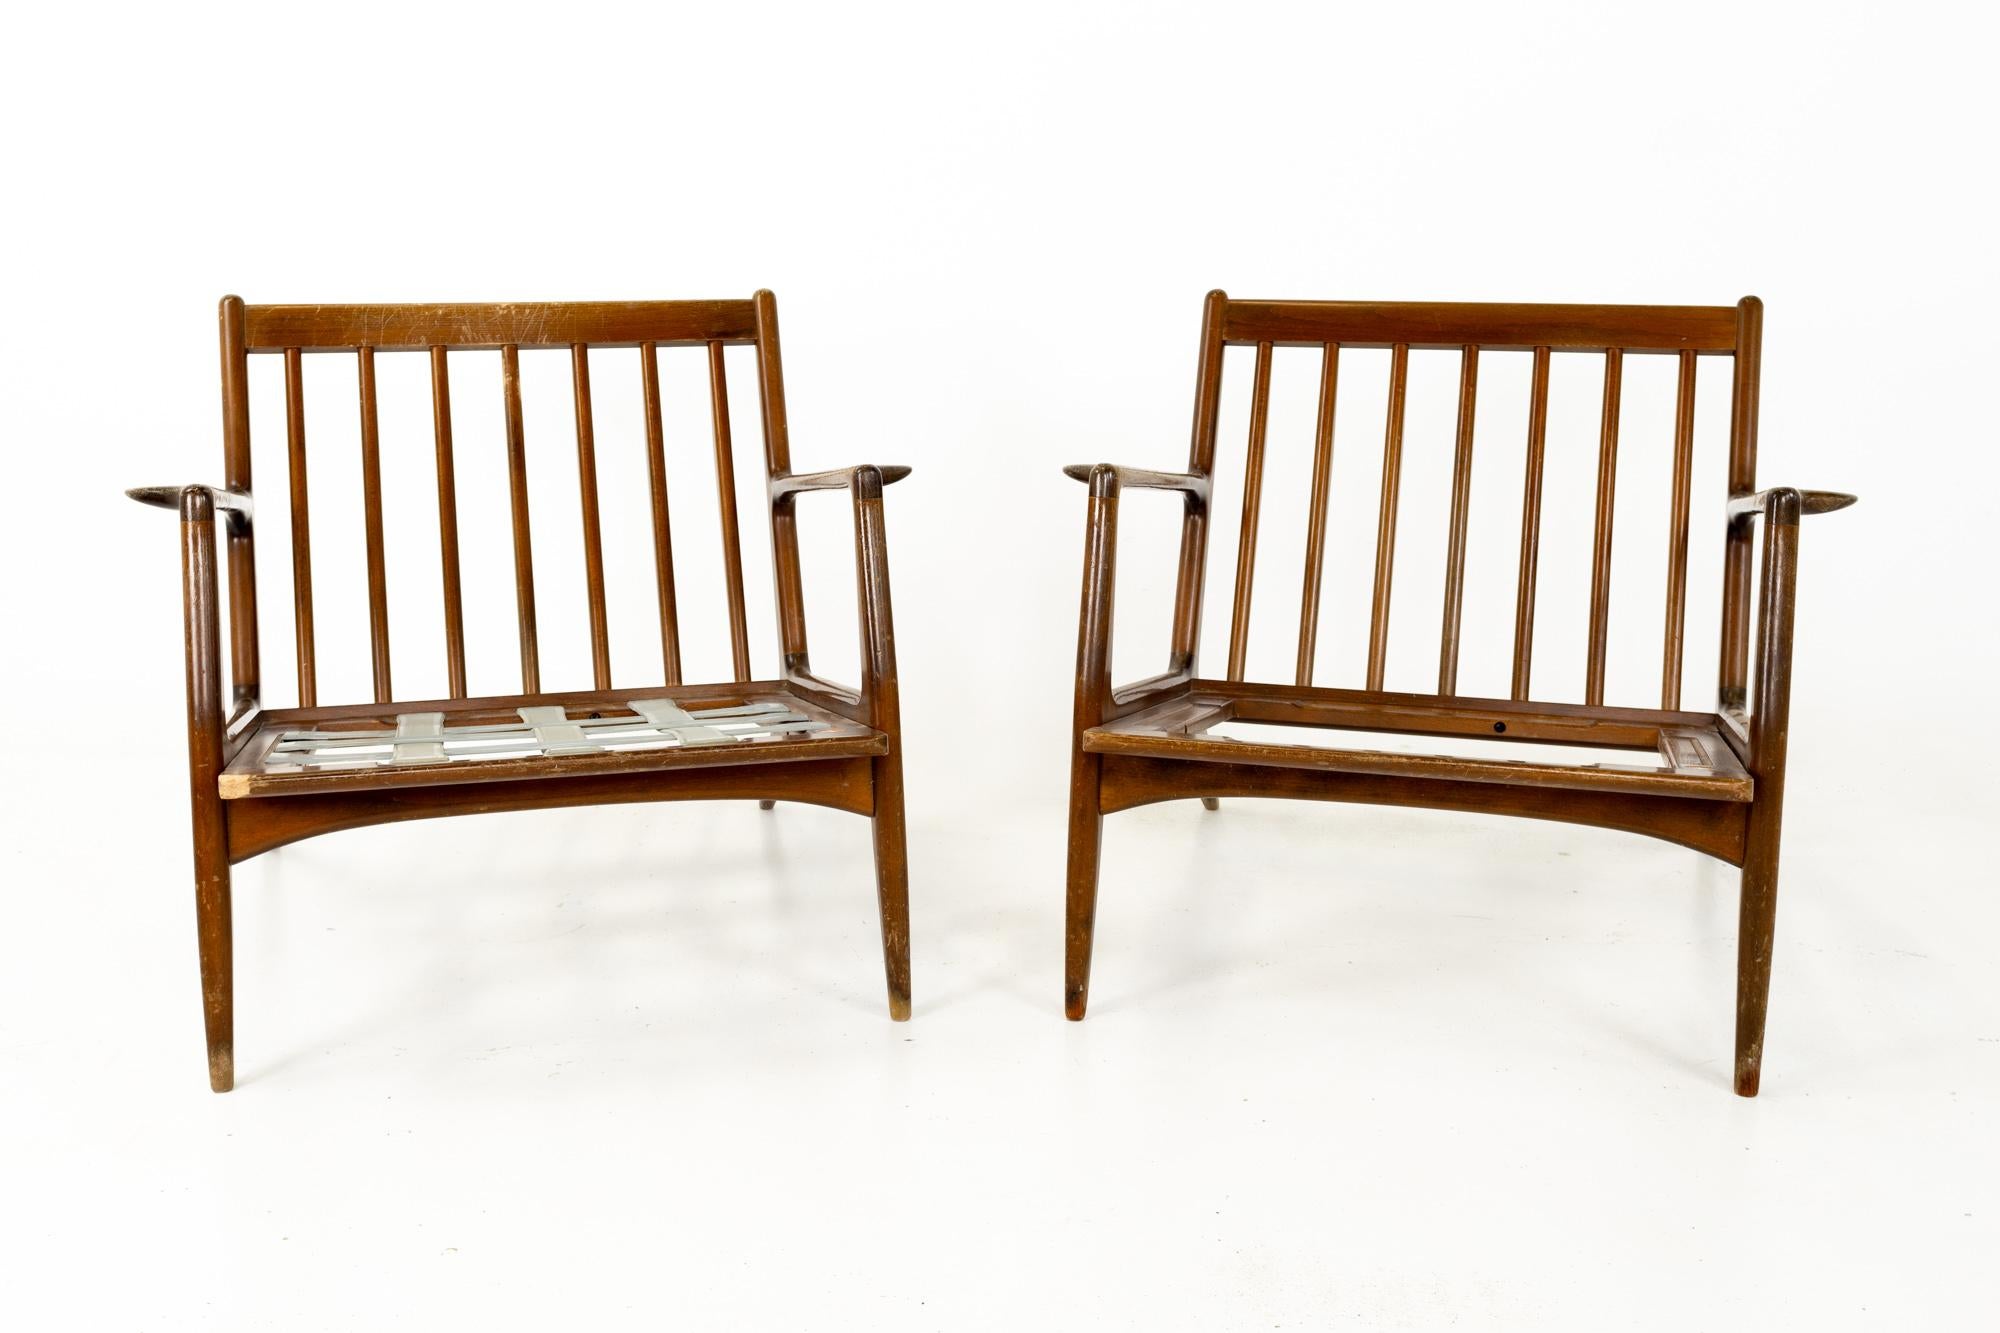 Kofod Larsen for Selig Mid Century Danish lounge chairs, pair
These chairs are 30 wide x 30 deep x 27 inches high, with a seat height of 11.75 and an arm height of 21 inches

This piece is available in what we call restored vintage condition. Upon